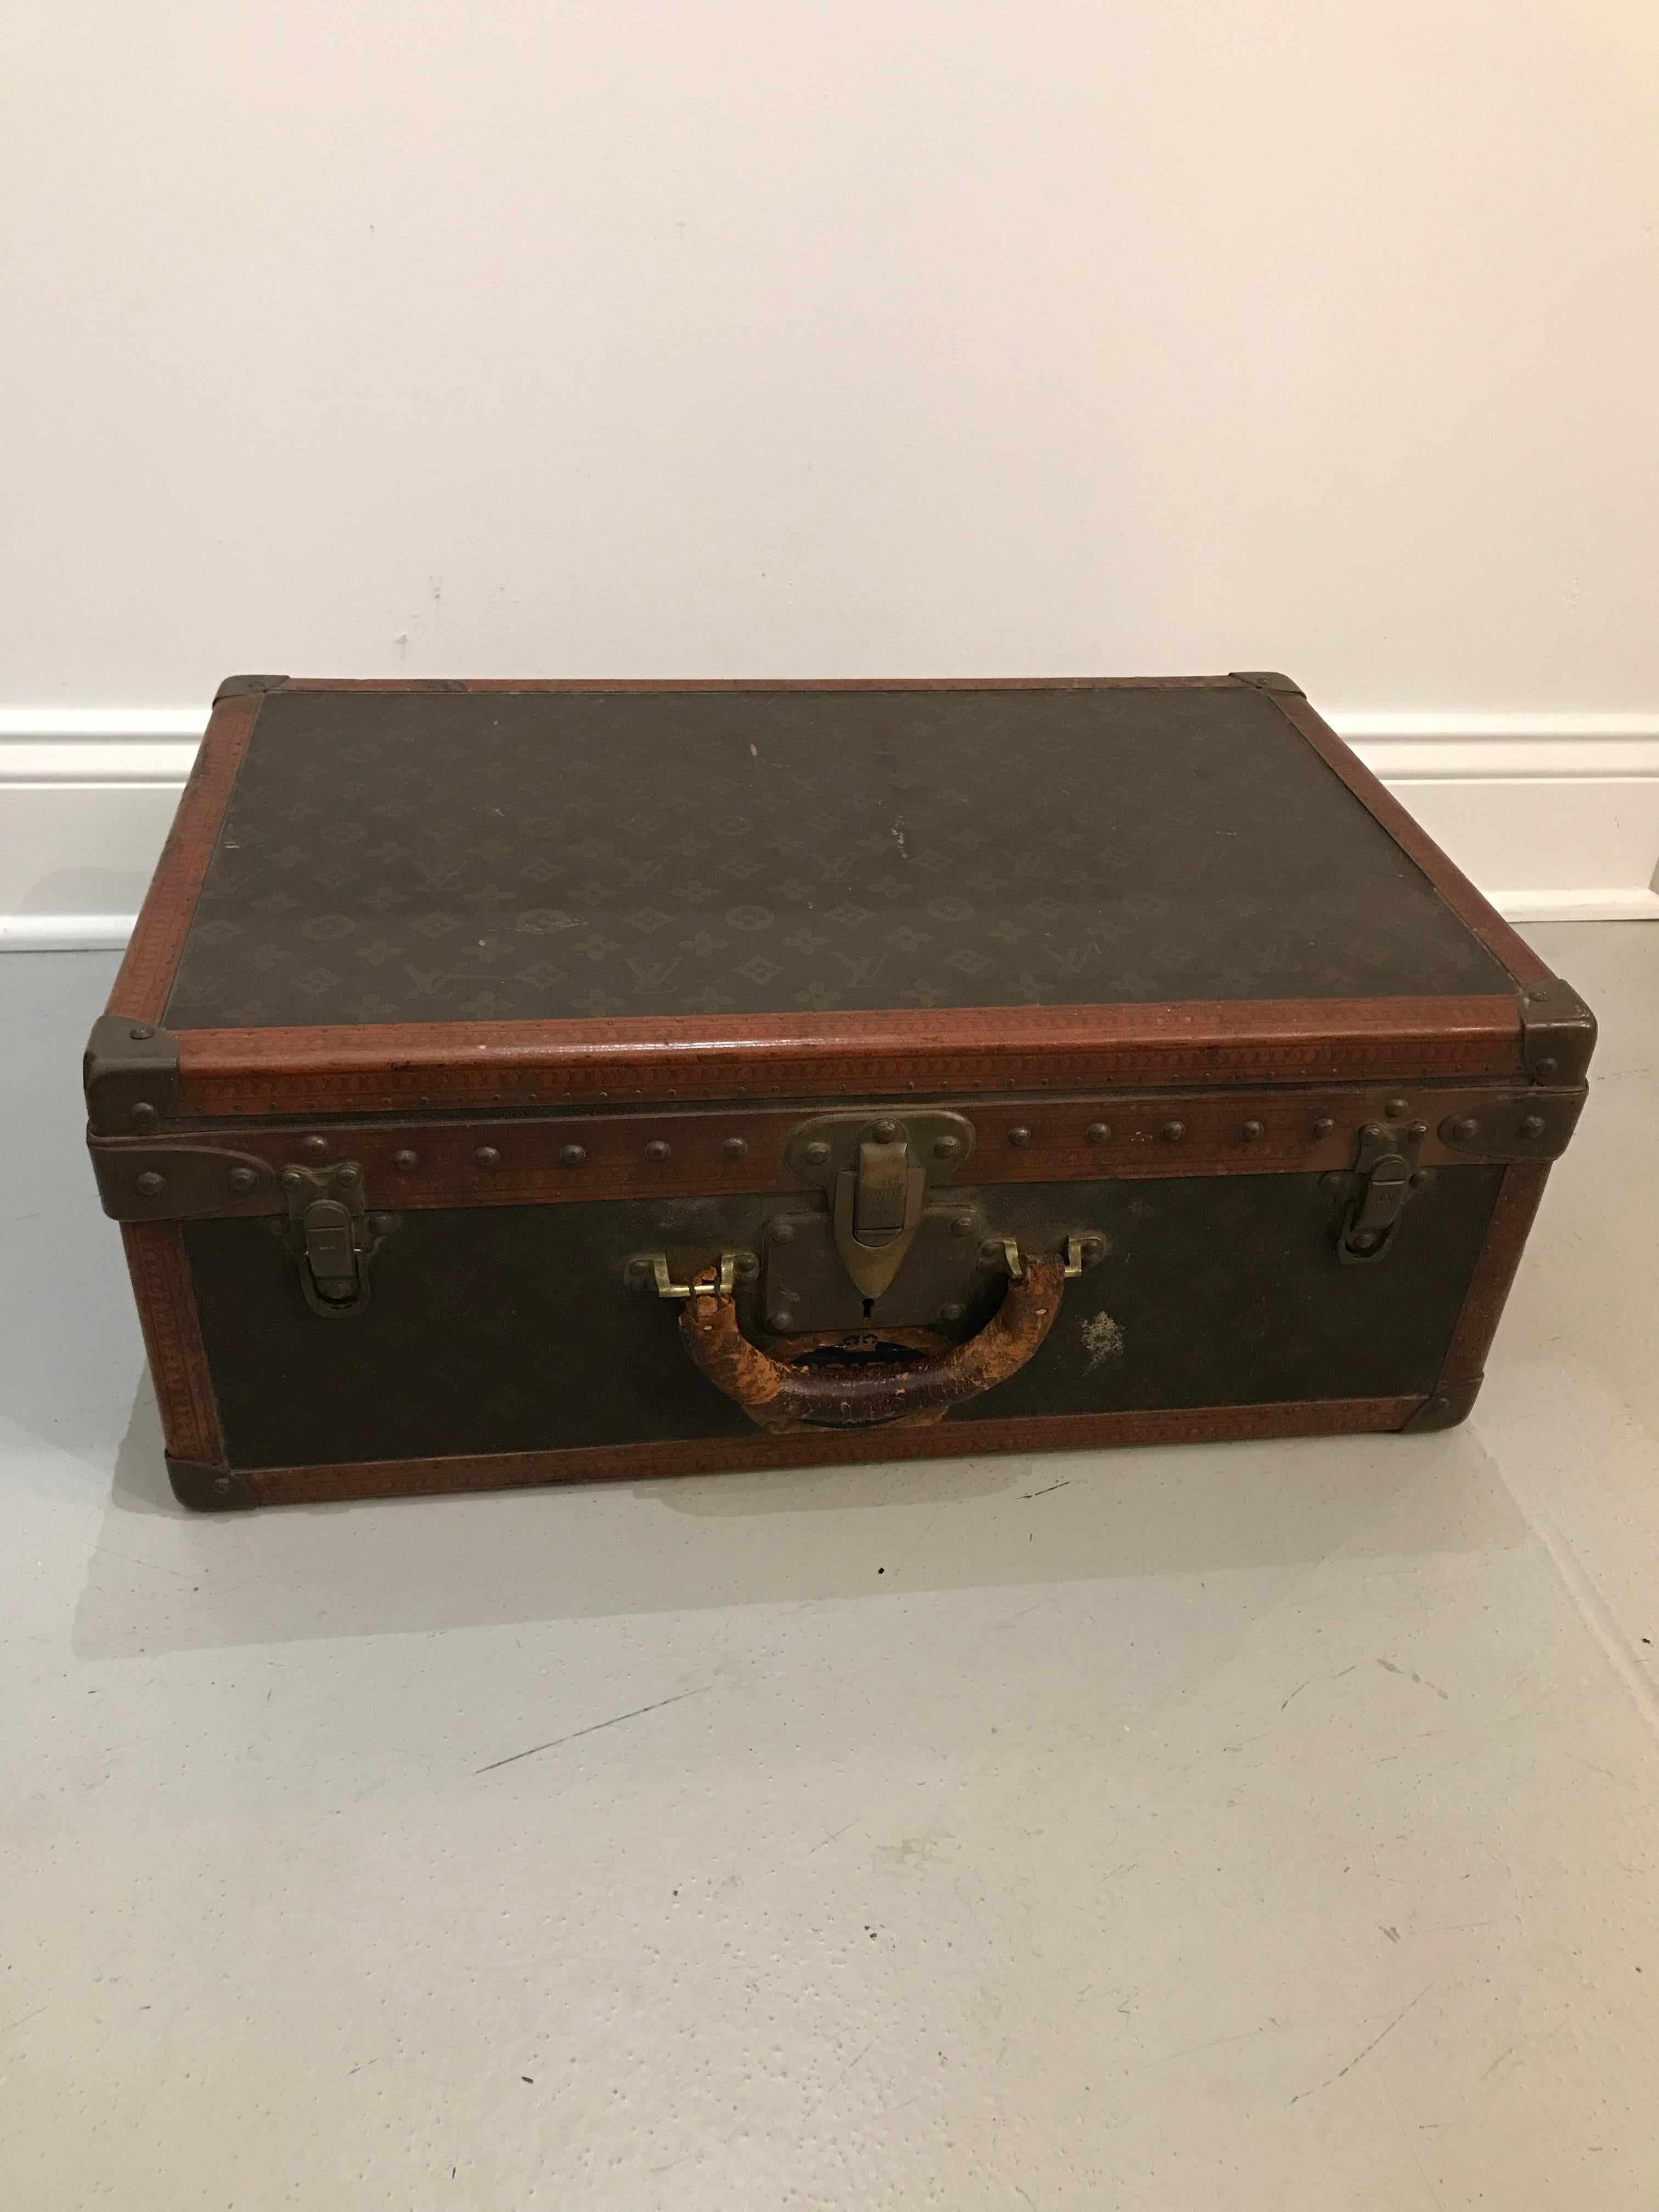 French, 20th century. A Louis Vuitton suitcase with a monogram canvas exterior, leather and brass-bound (all rivets and hardware are marked), opens to fitted interior with removable tray, labelled on interior lid with stamped serial number 792647